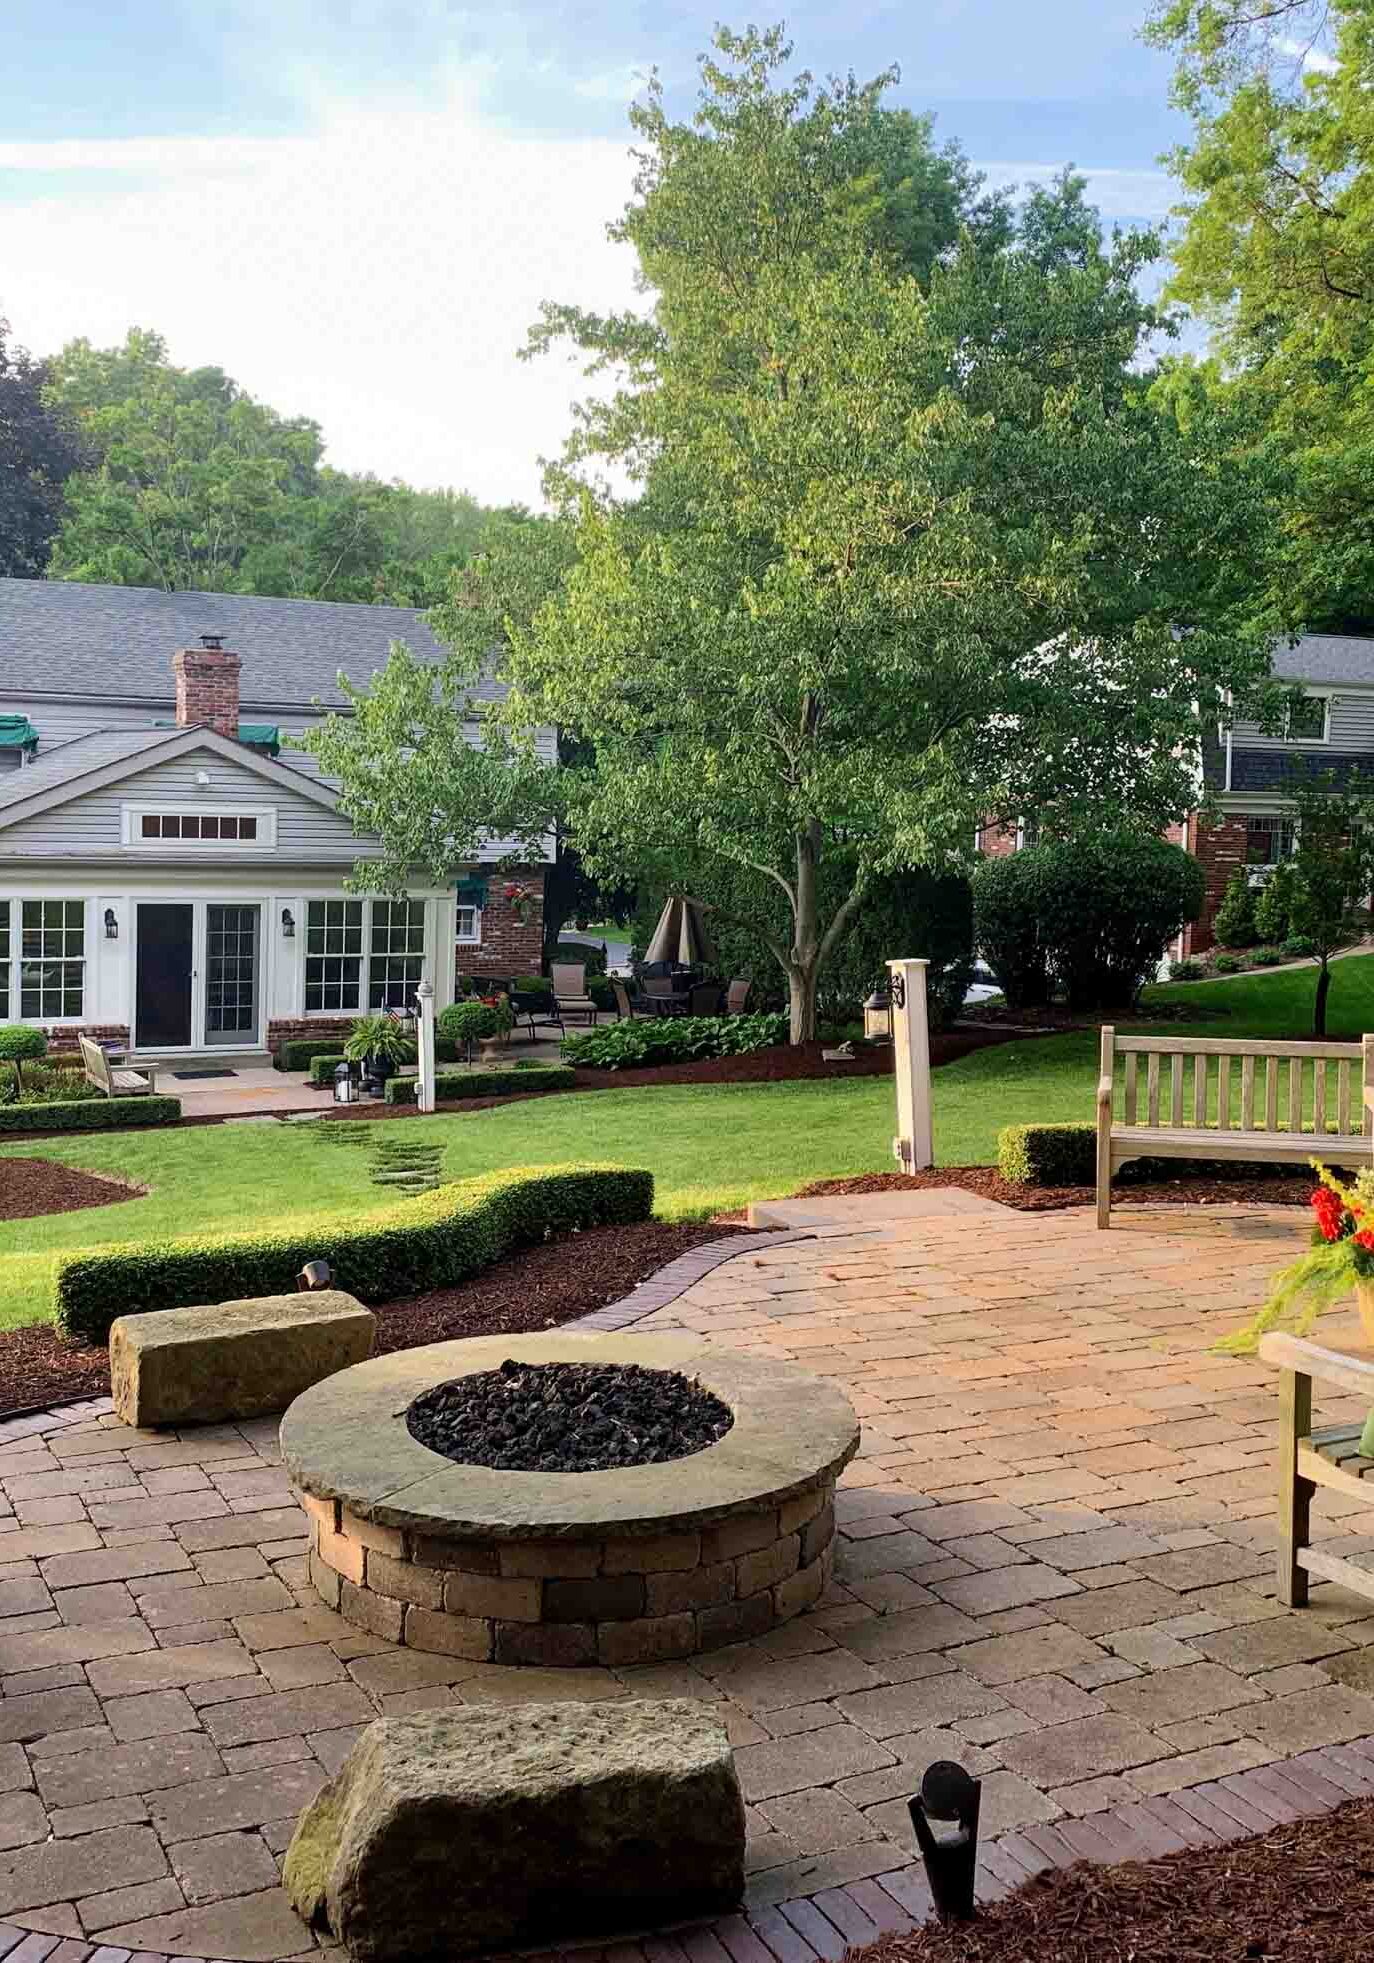 Mt. Lebanon, PA with Our Landscape Pricing Guide